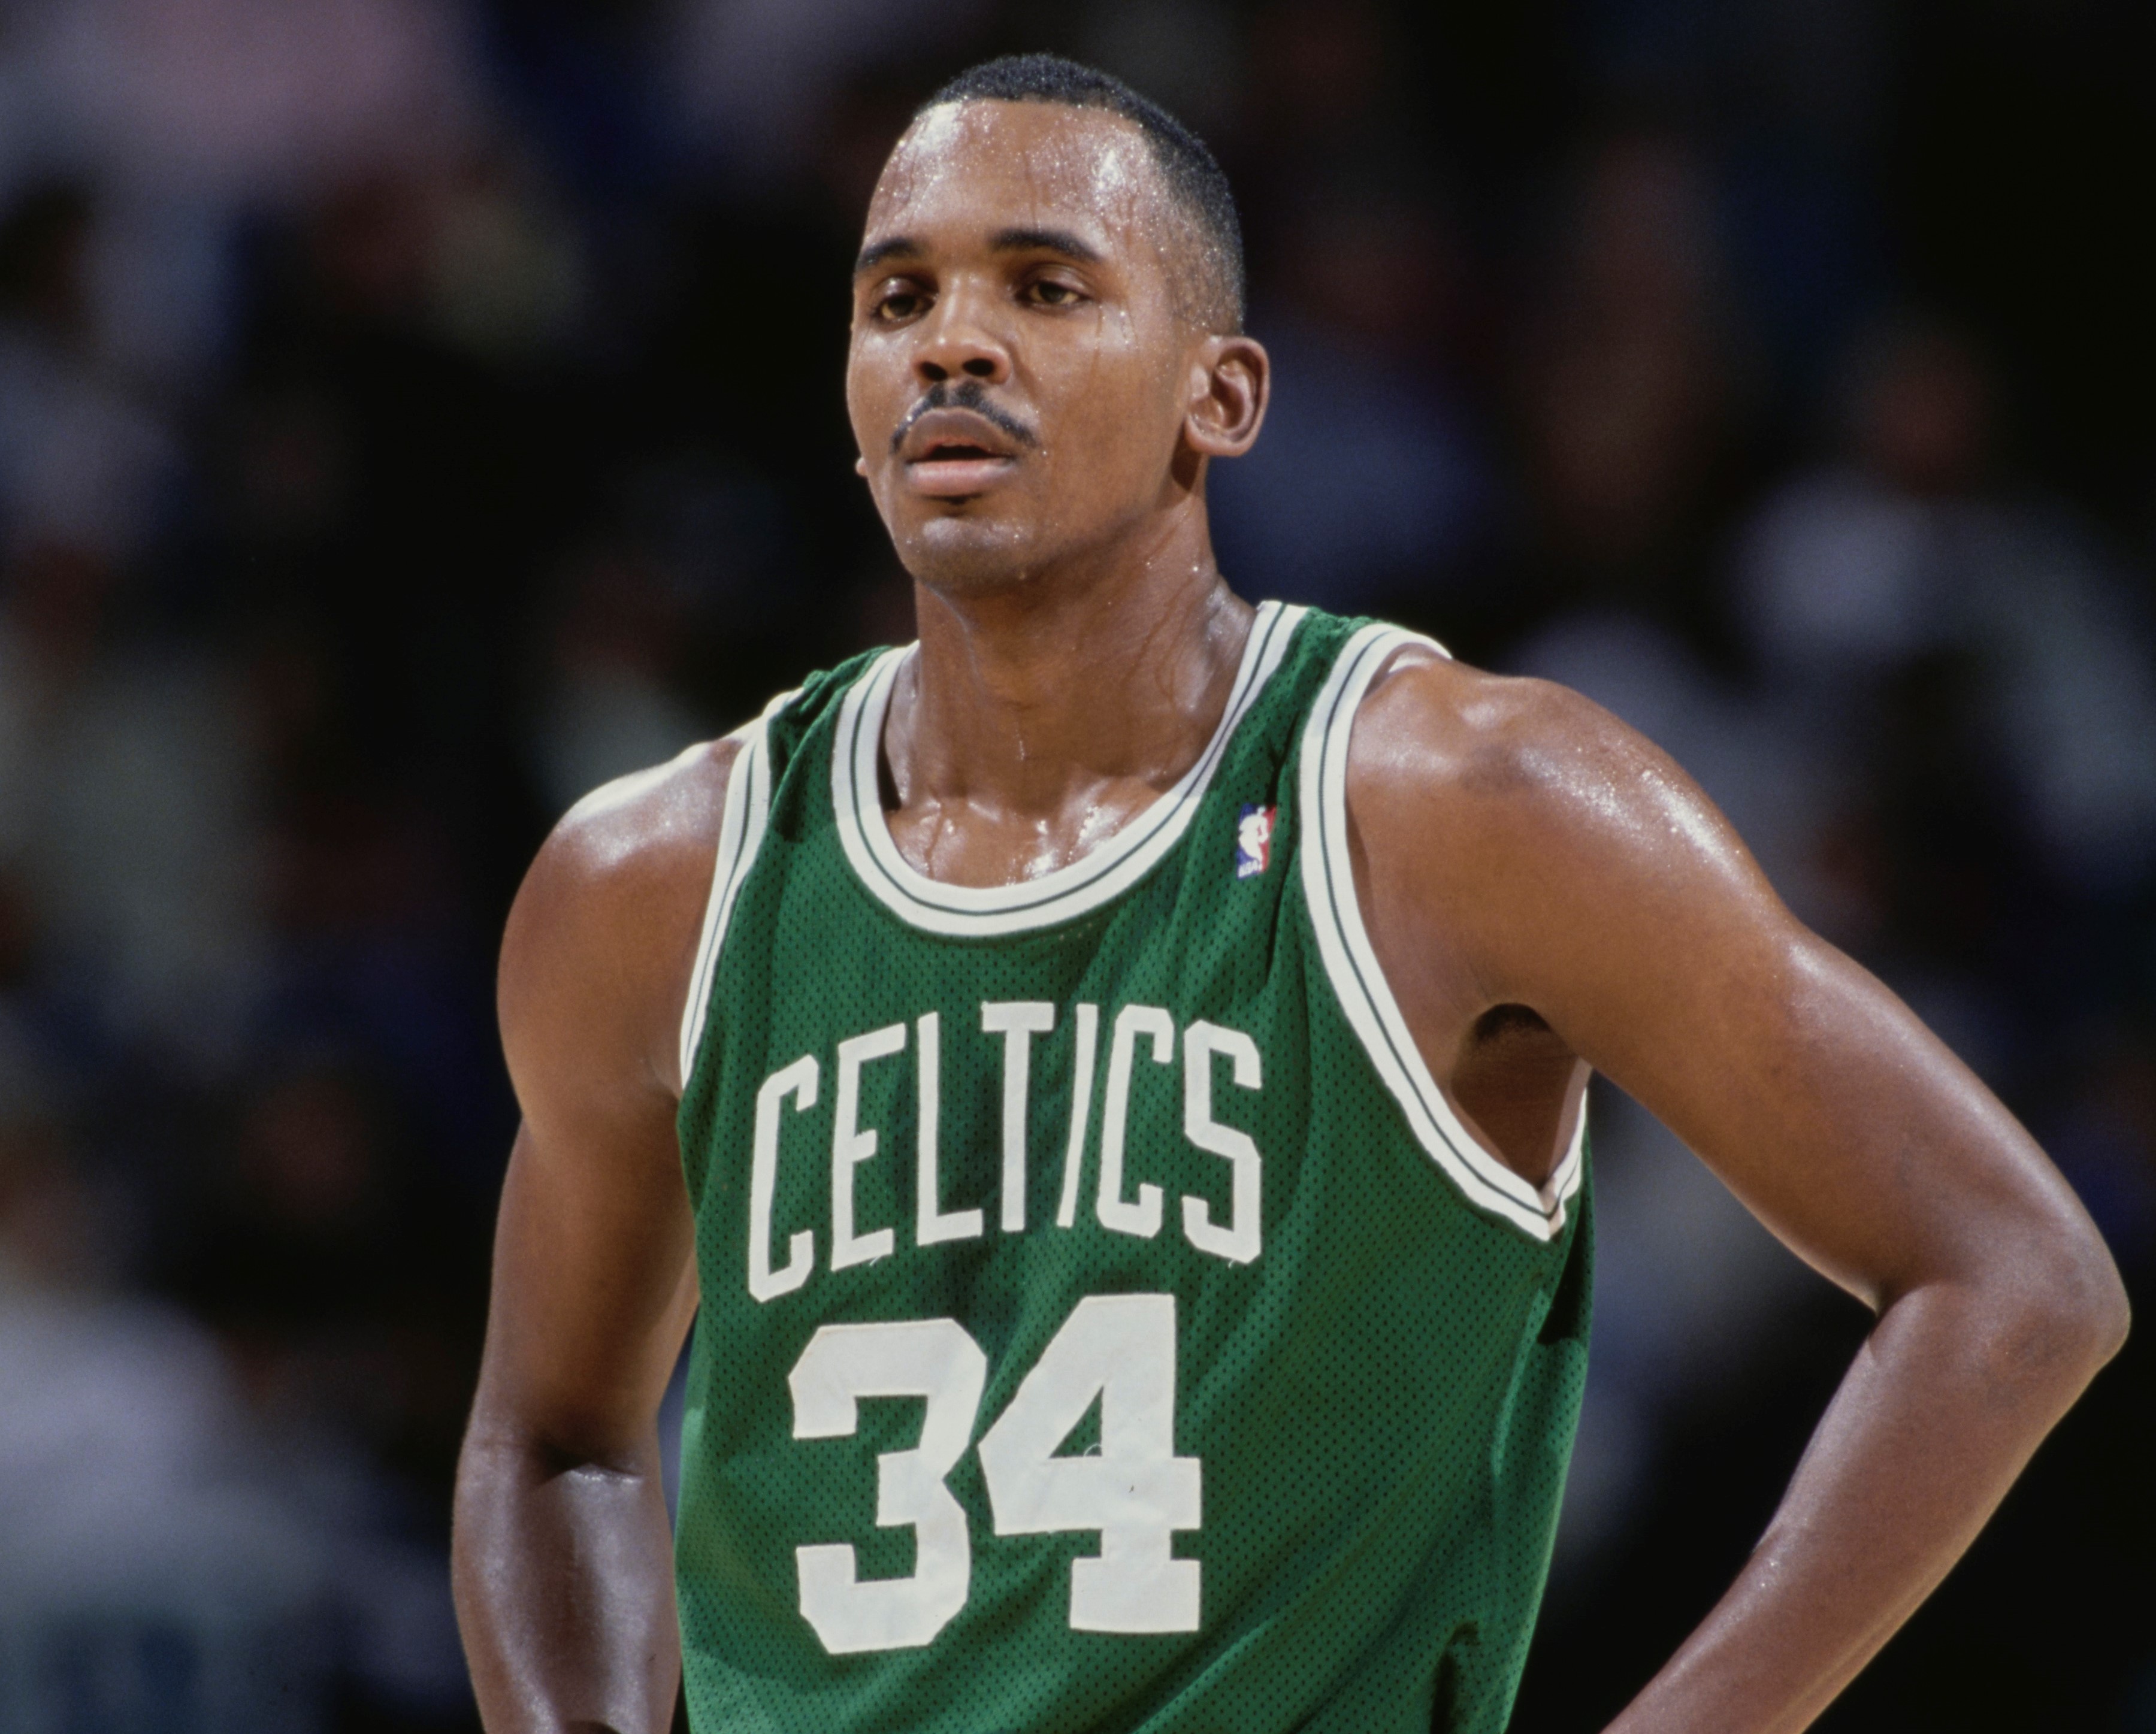 Kevin Gamble of the Boston Celtics during a game against the Charlotte Hornets.